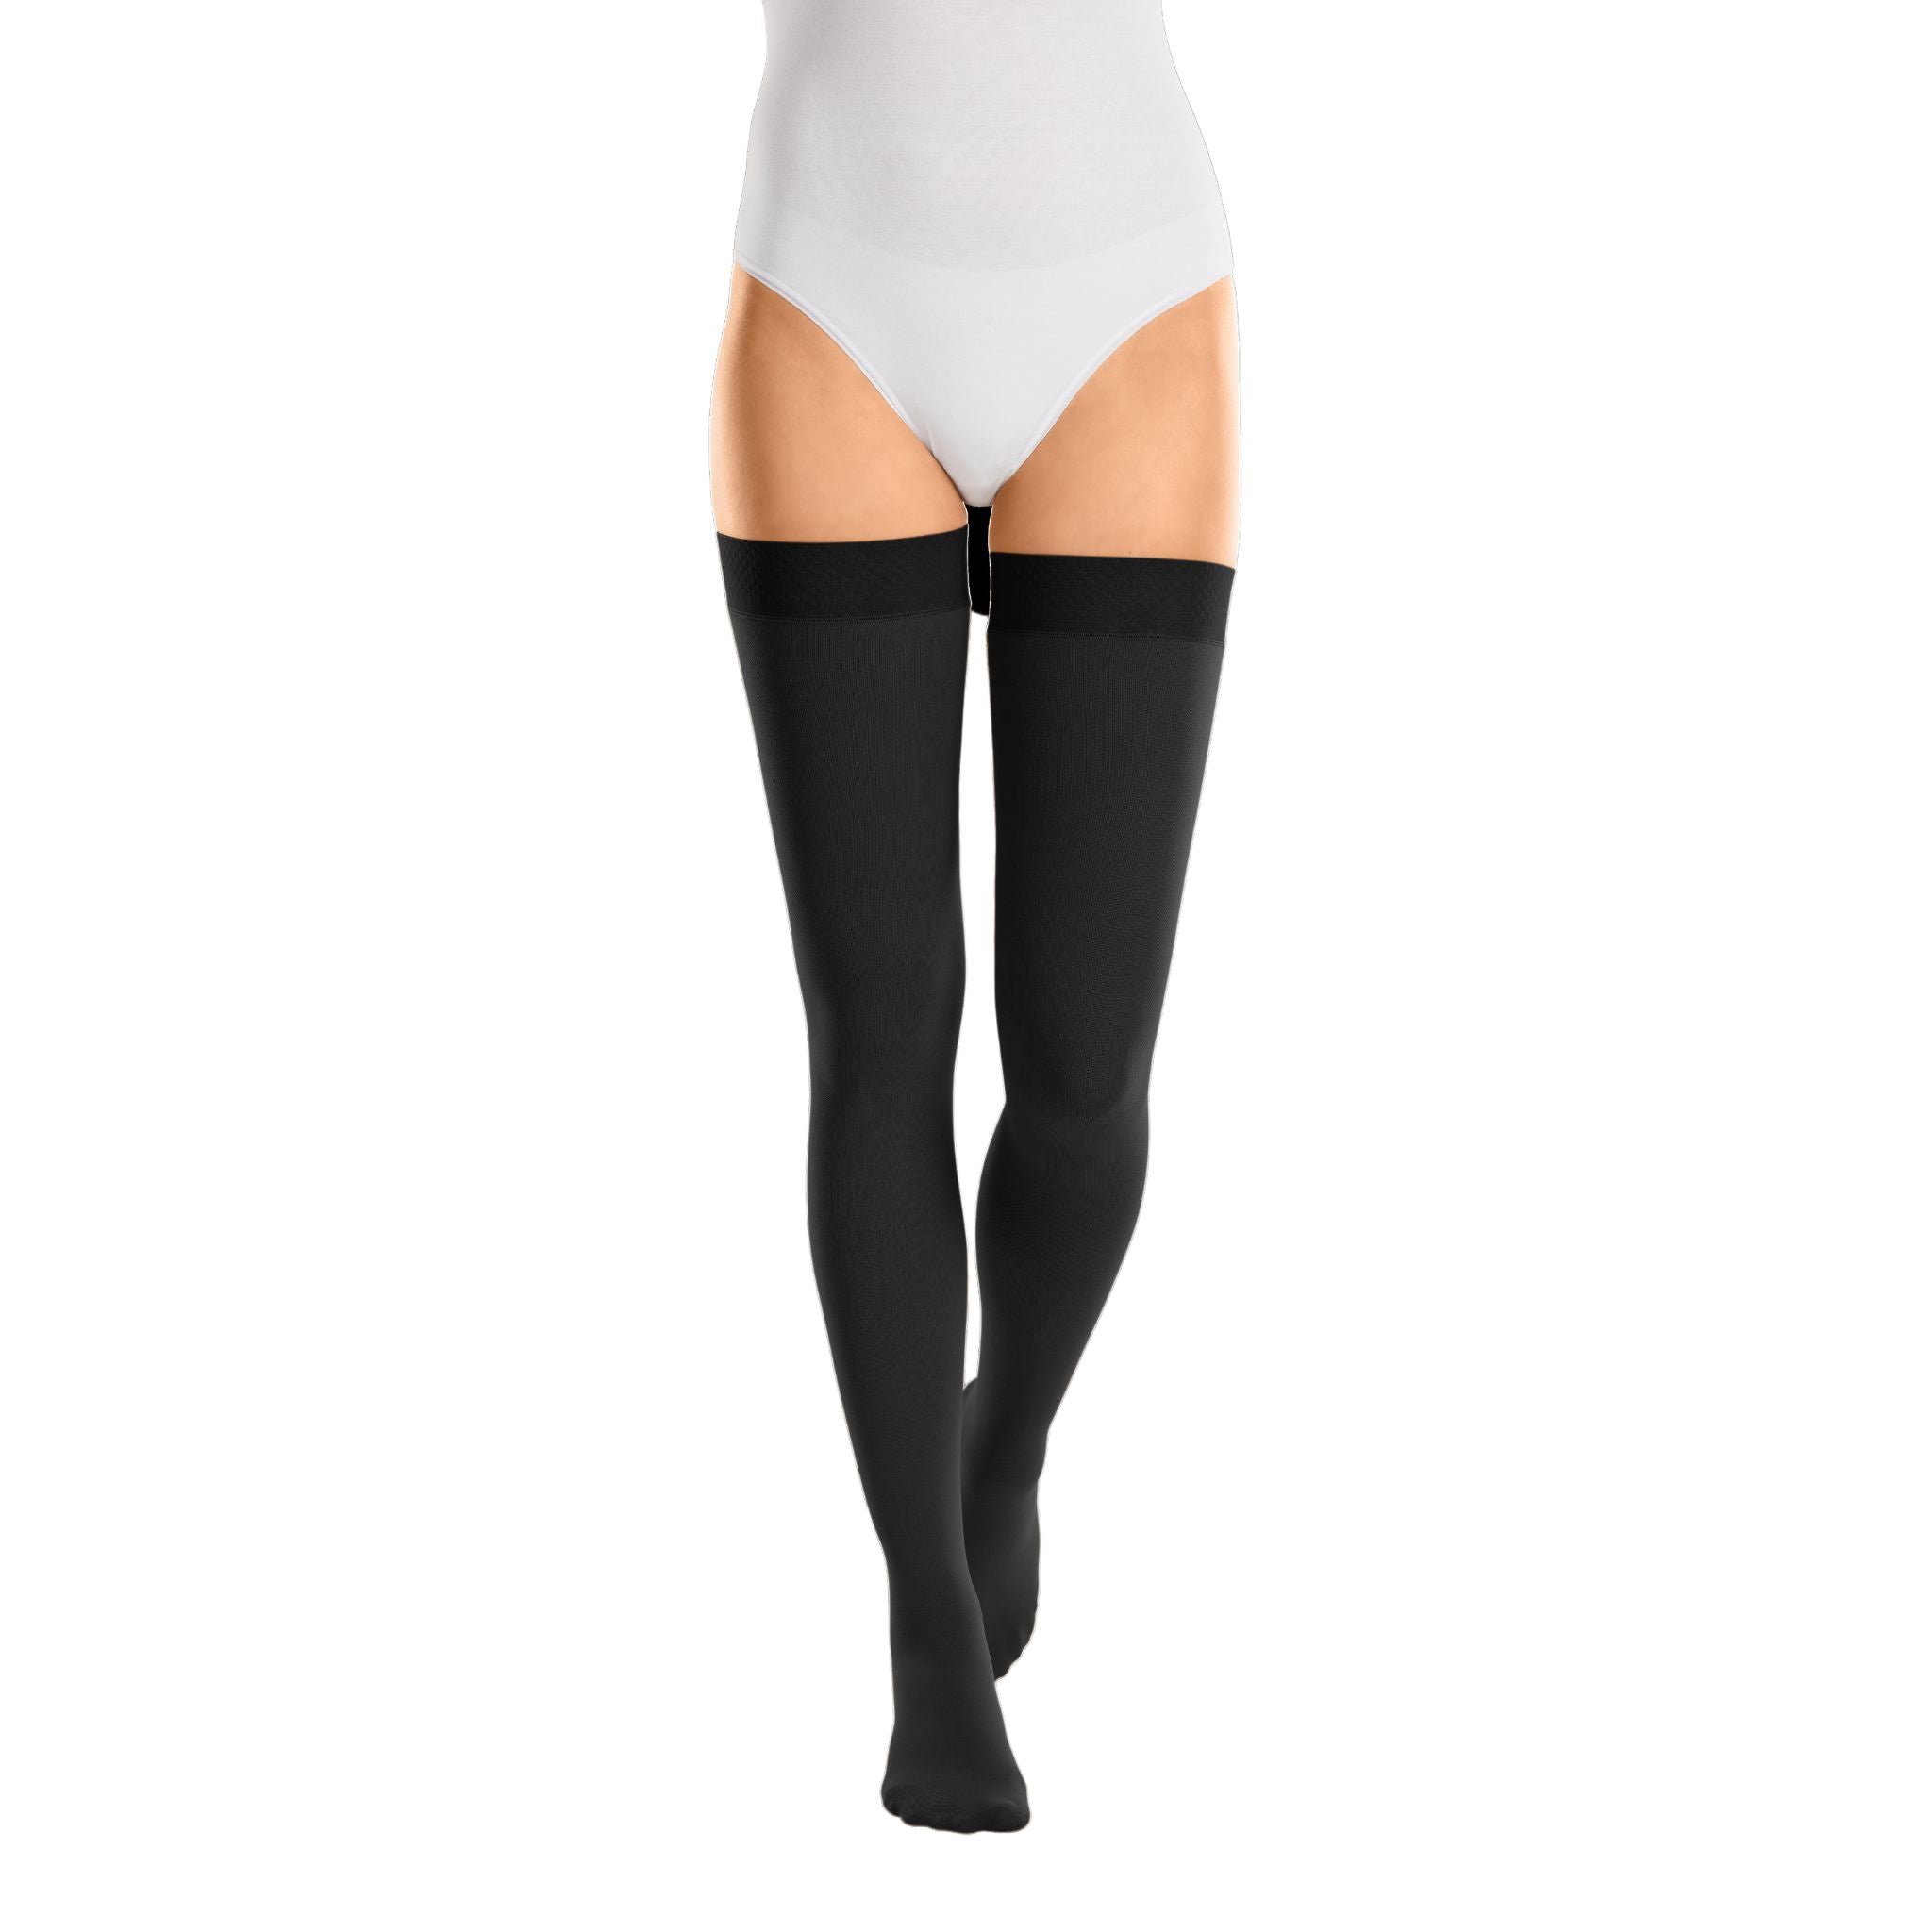 Compression Stockings | Thigh High | Closed Toe | Silicone Topband | Black | mediven cotton